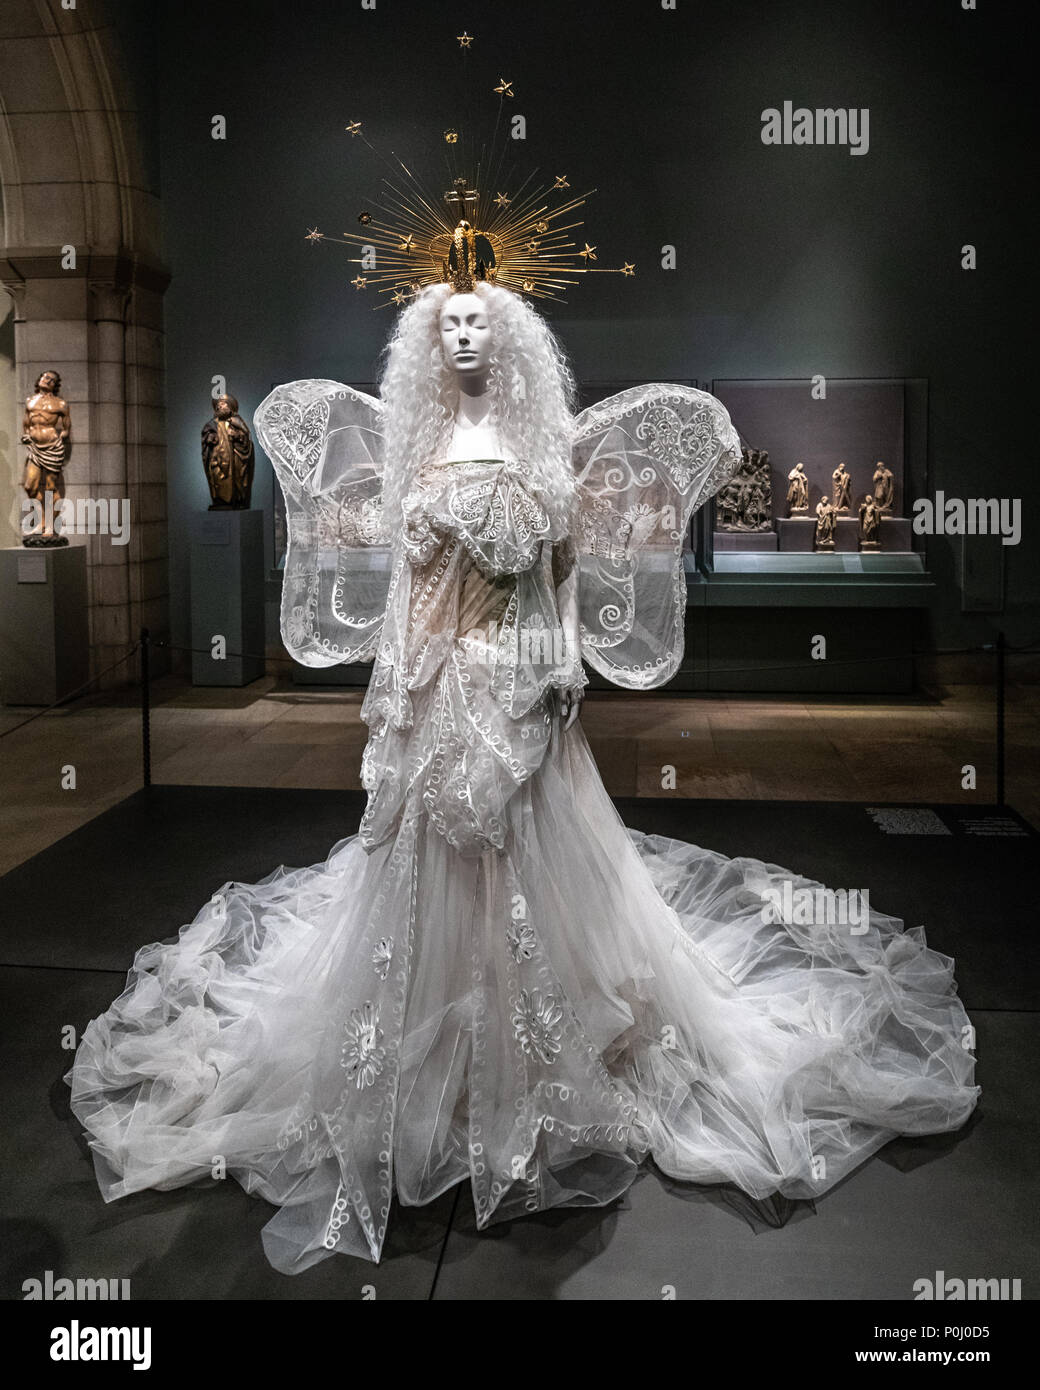 New York, USA. 9th June 2018. NEW YORK, USA, 9 June 2018. 'Madonna' Wedding ensemble designed by John Galliano for the House of Dior on display at the Metropolitan Museum of Art for the 'Heavenly Bodies' exhibition. This ensemble is made of white silk tulle, embroidered white silk and metal thread.  Photo by Enrique Shore Credit: Enrique Shore/Alamy Live News Stock Photo